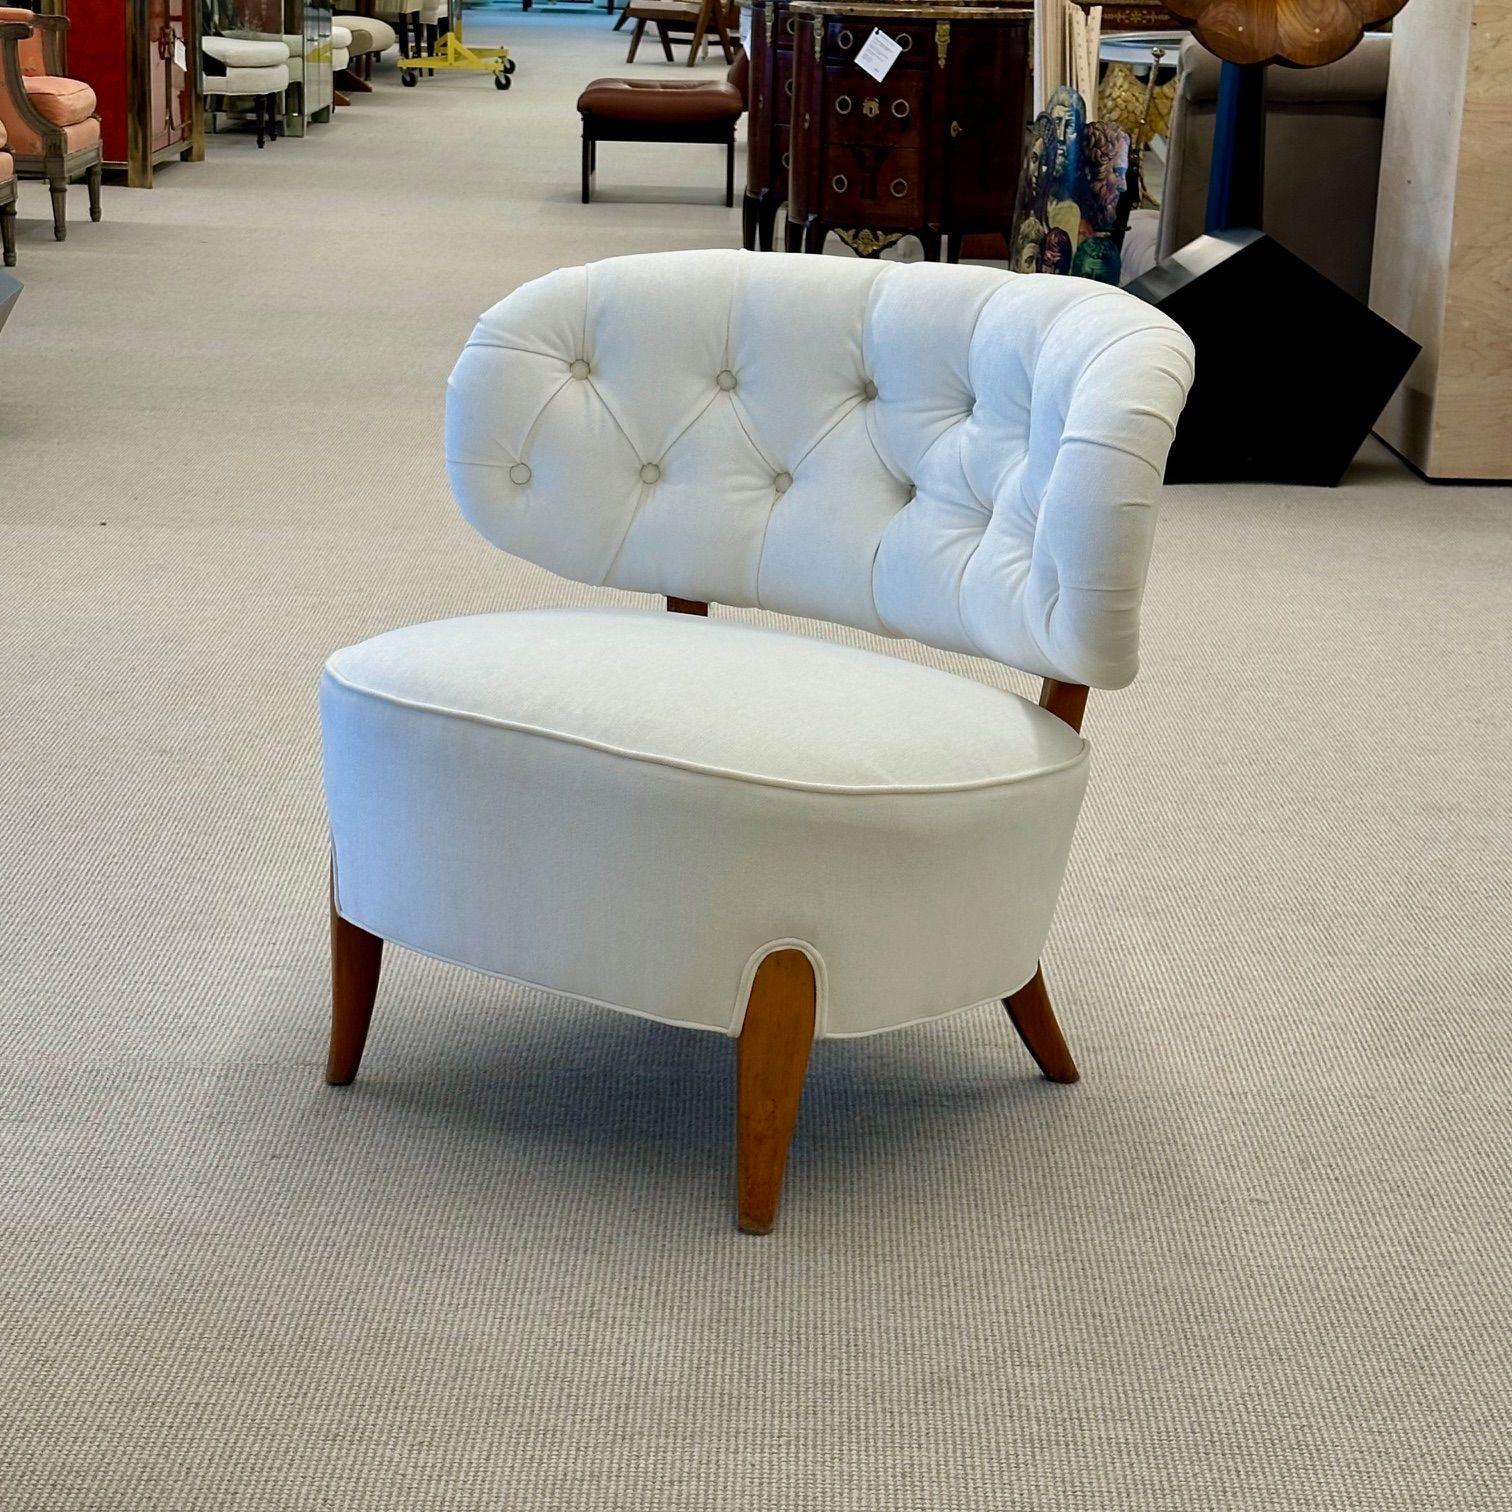 Mid-20th Century Otto Schulz, Mid-Century Lounge Chairs, White Velvet, Beech, Sweden, 1940s For Sale